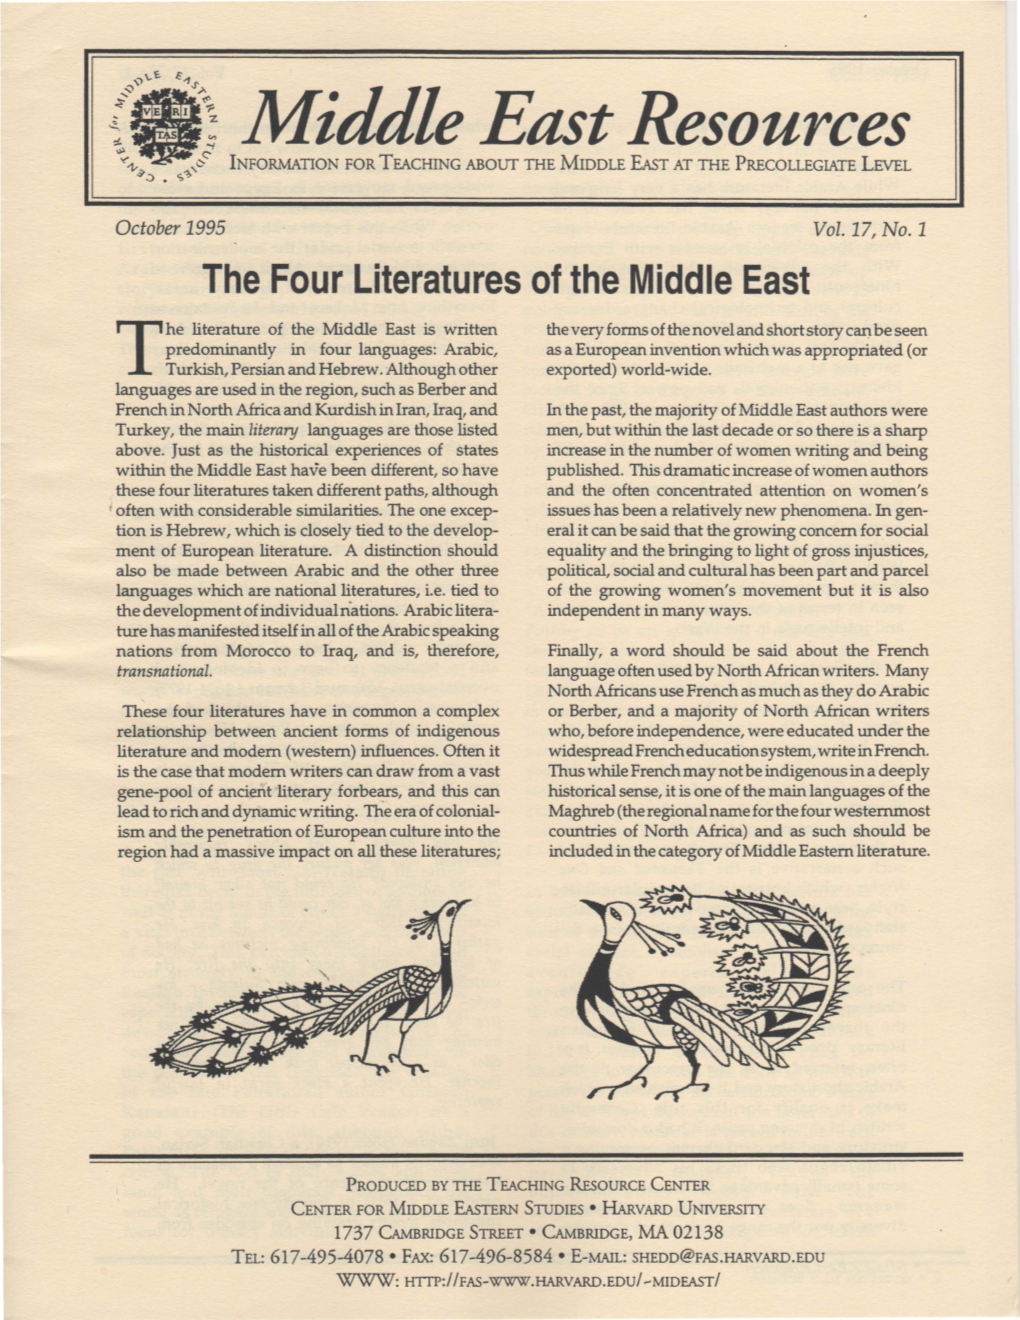 The Four Literatures of the Middle East